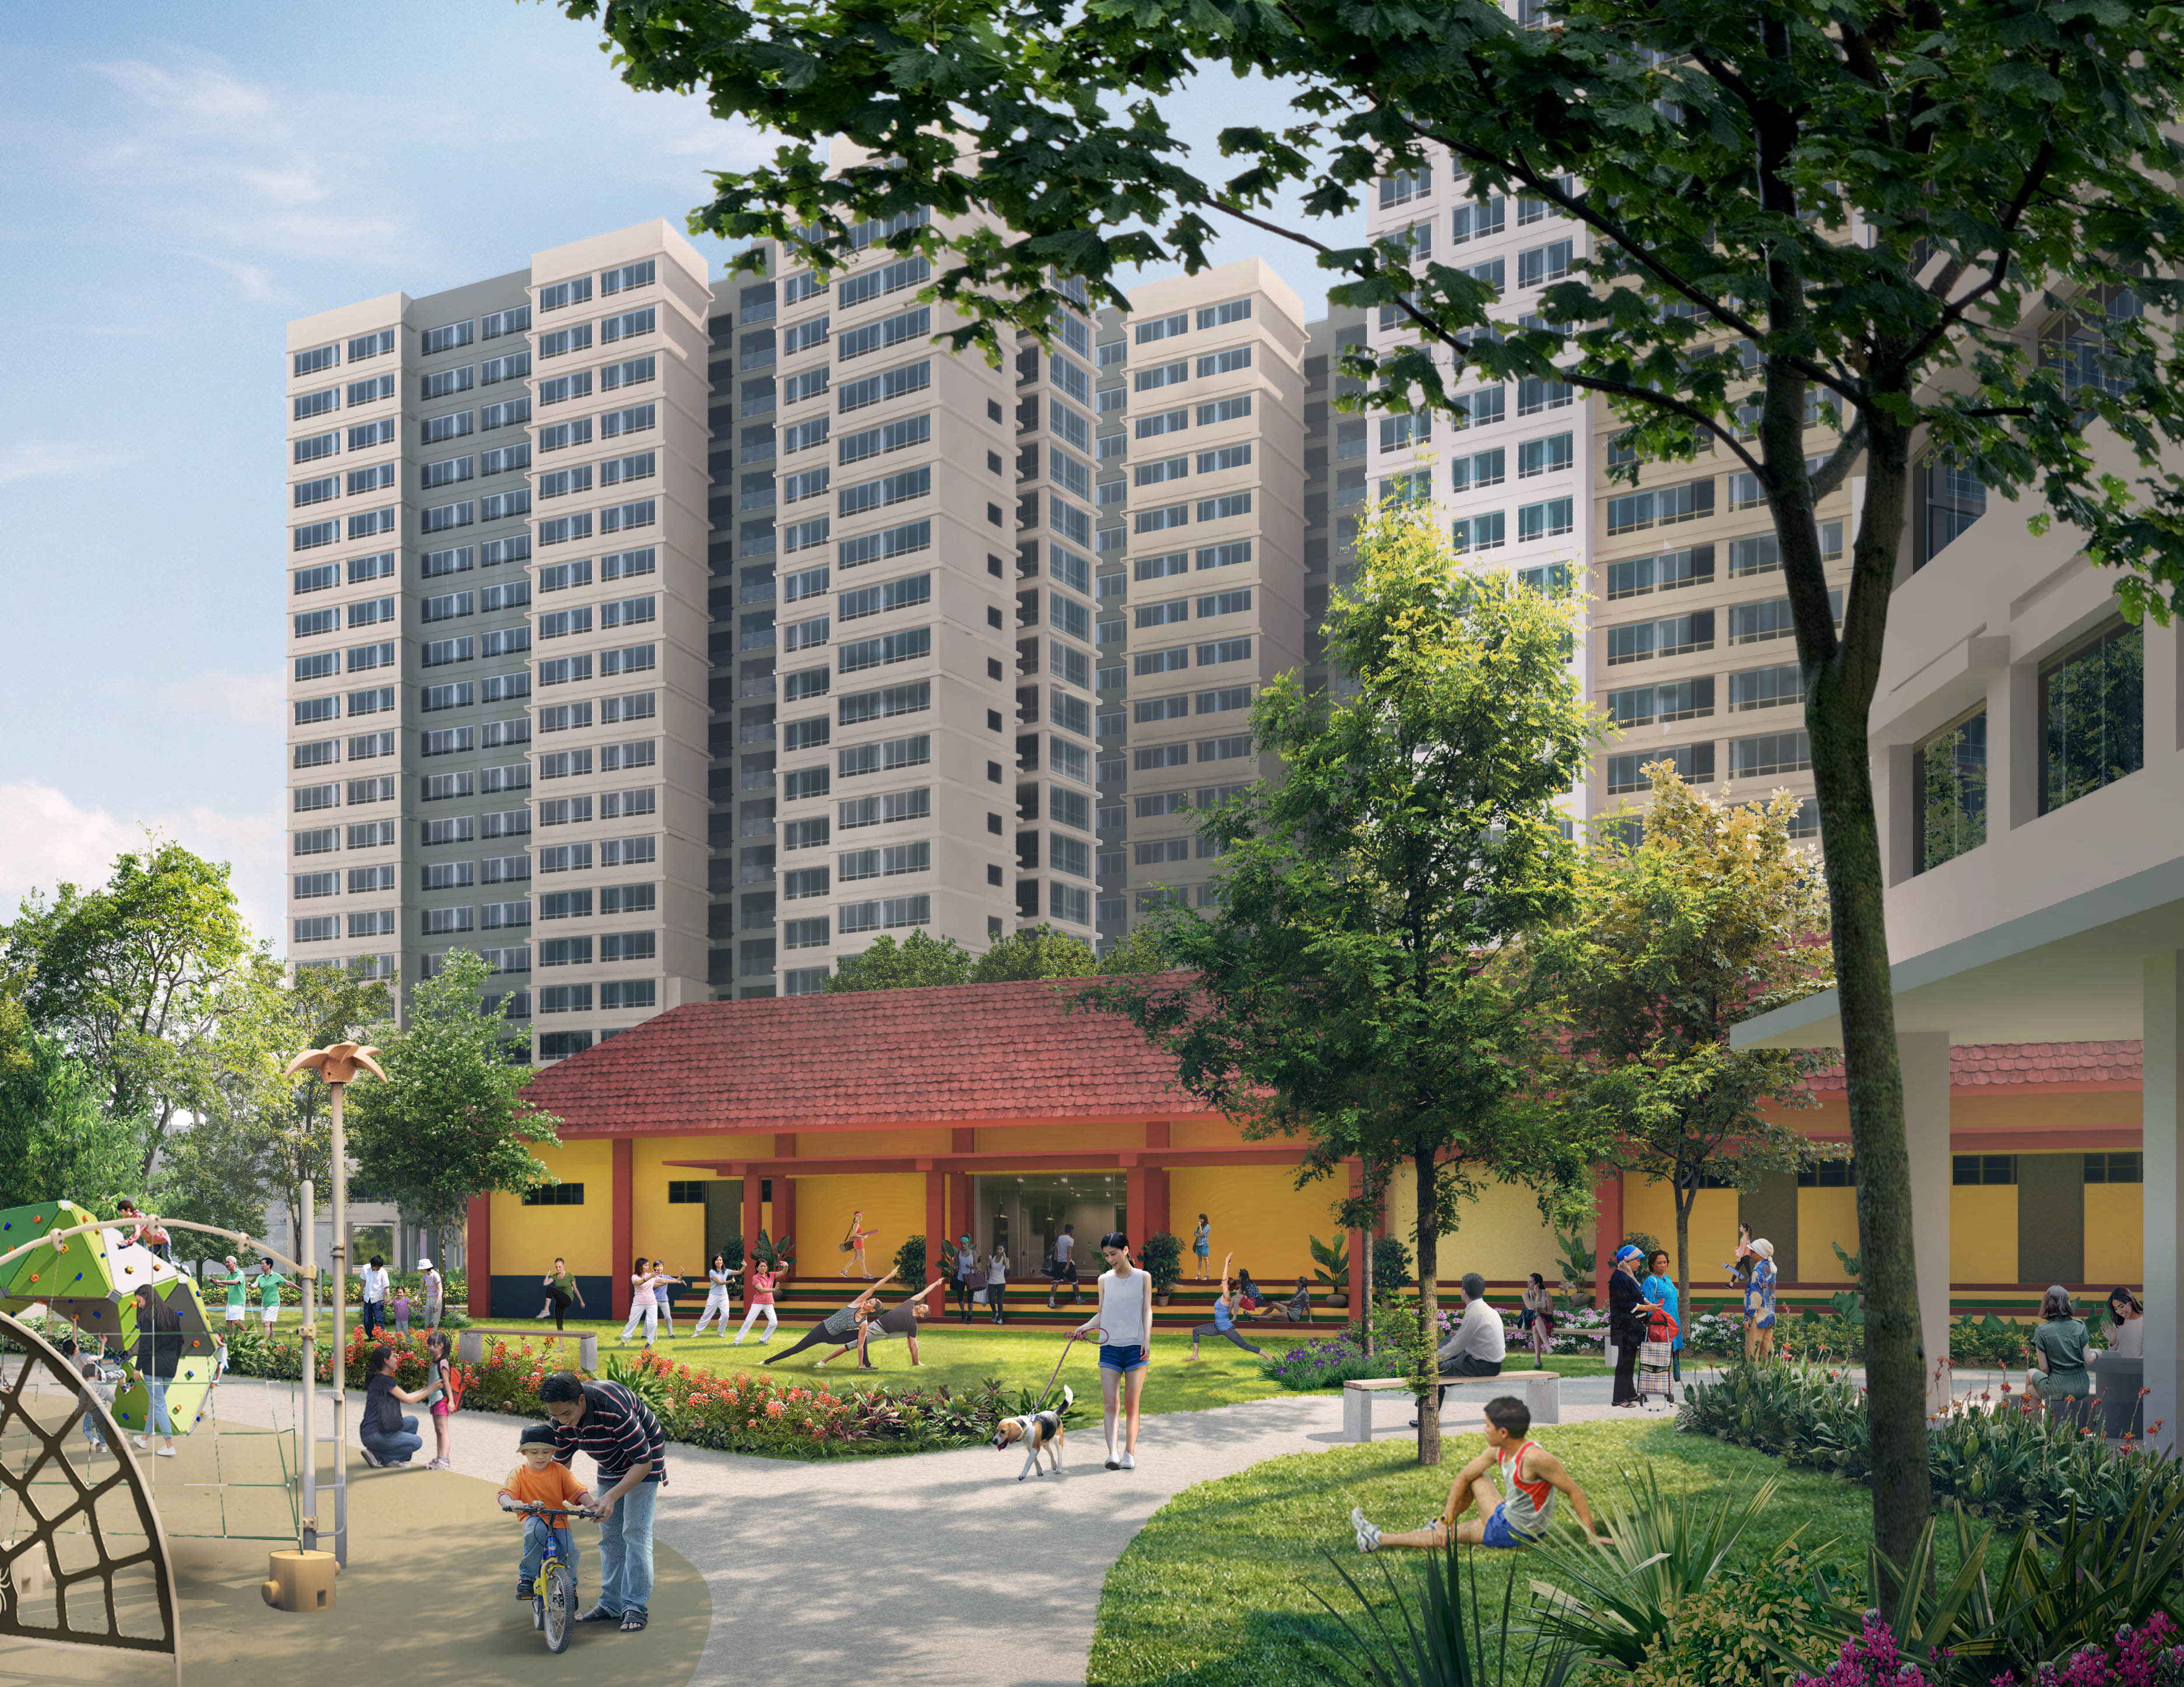 1,600 HDB flats, integrated sports facilities to be built on redeveloped Farrer Park site